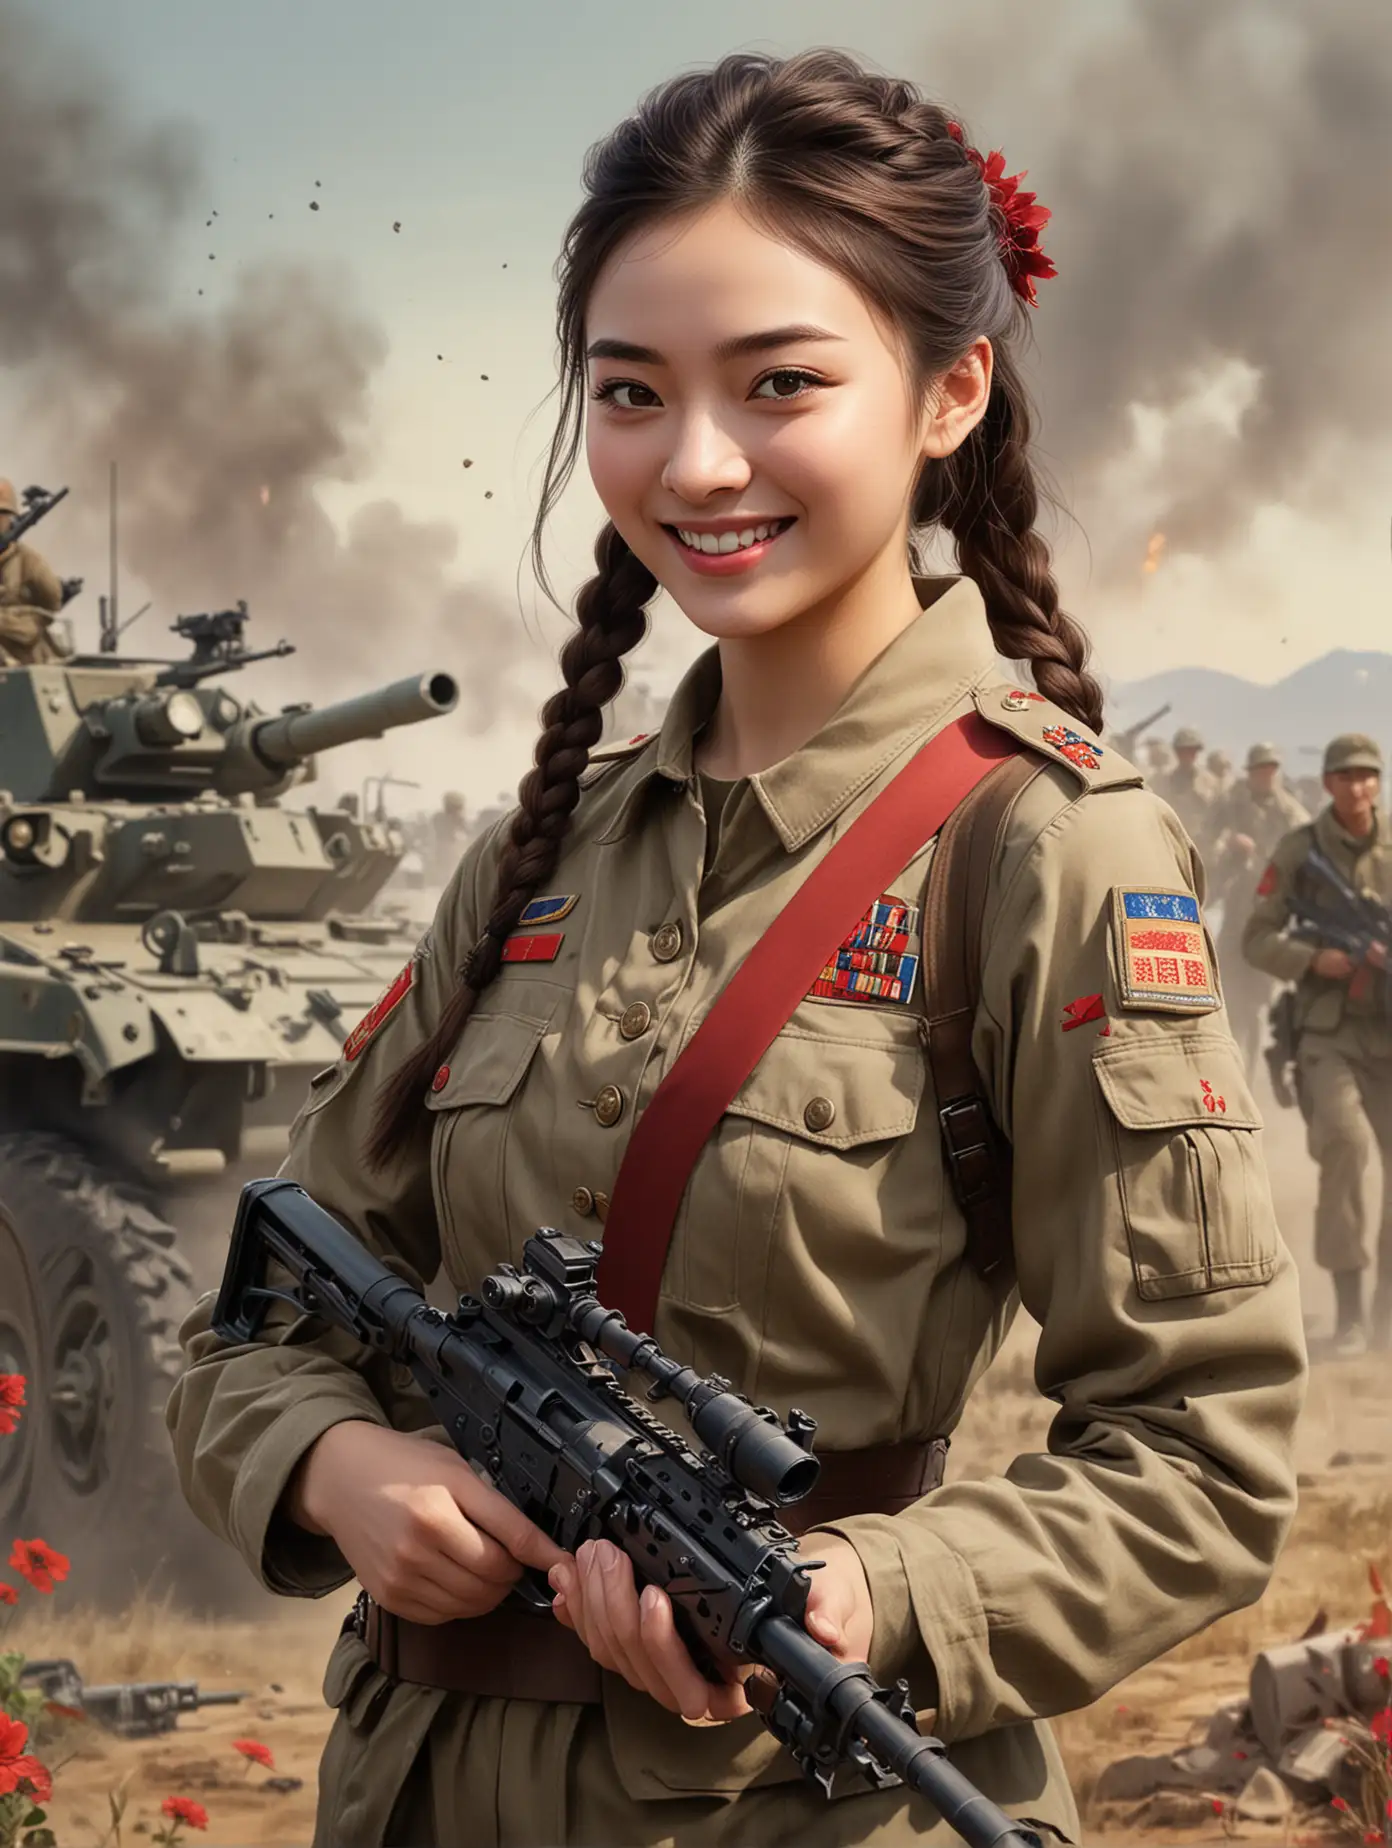 Cheerful Jing Tian Hopeful Soldier Amidst Wartime Chaos